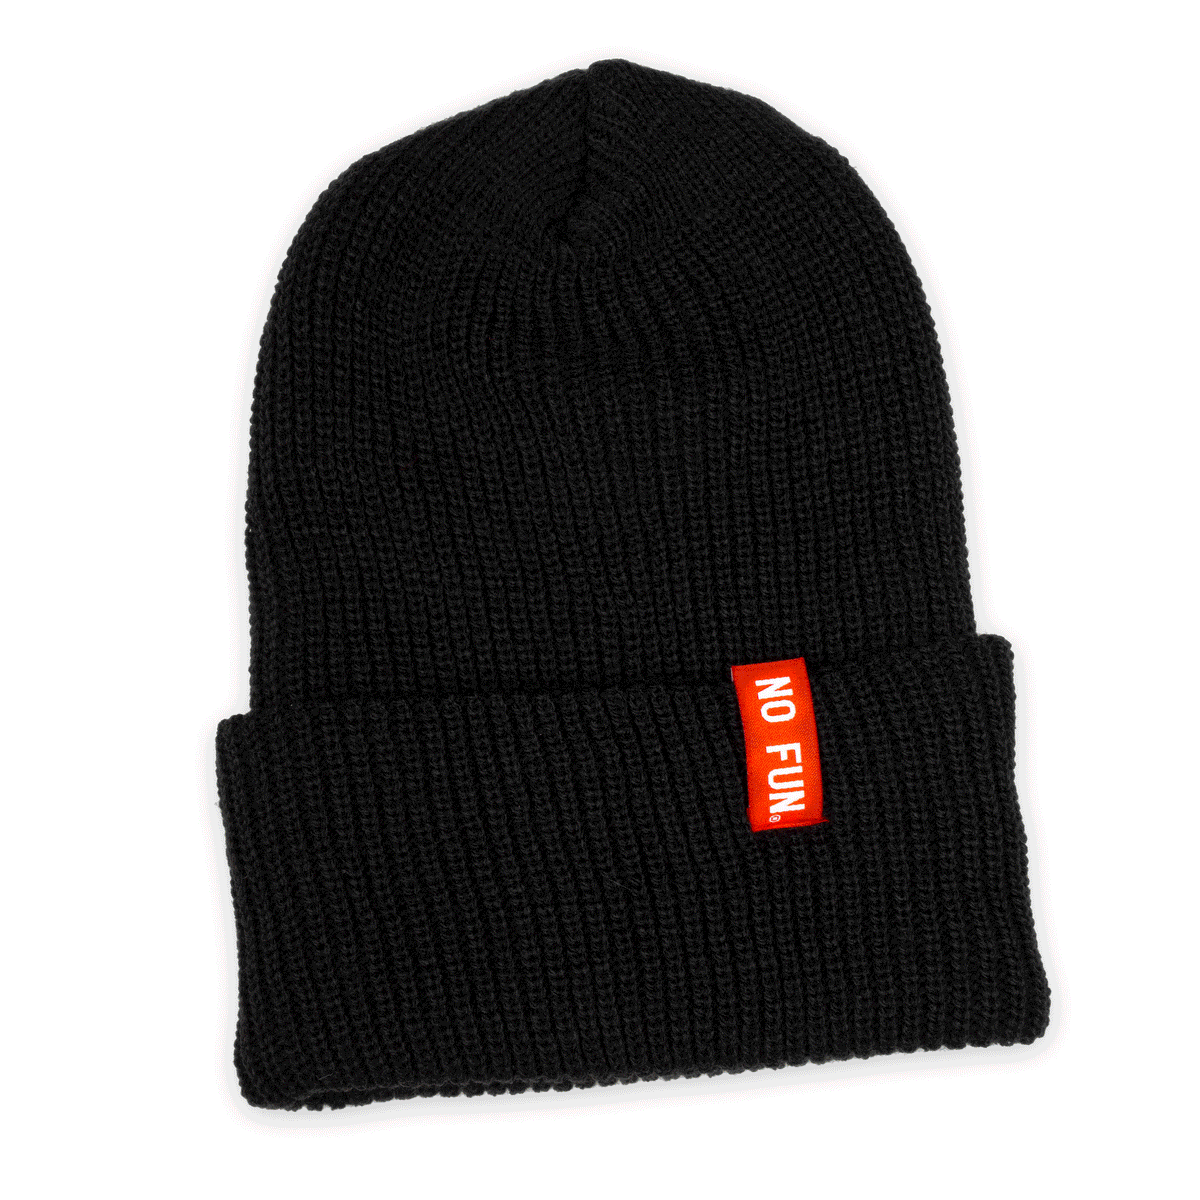 Animated Gif showcasing the available colours of the "No Fun®" Ribbed beanie.  The Gif flashes through each available colour in the following order:  Black, Navy, Olive Drab, Desert Tan.  The beanie features a small, red, woven label that fold over the cuff.  the label reads "No Fun®" in white text.